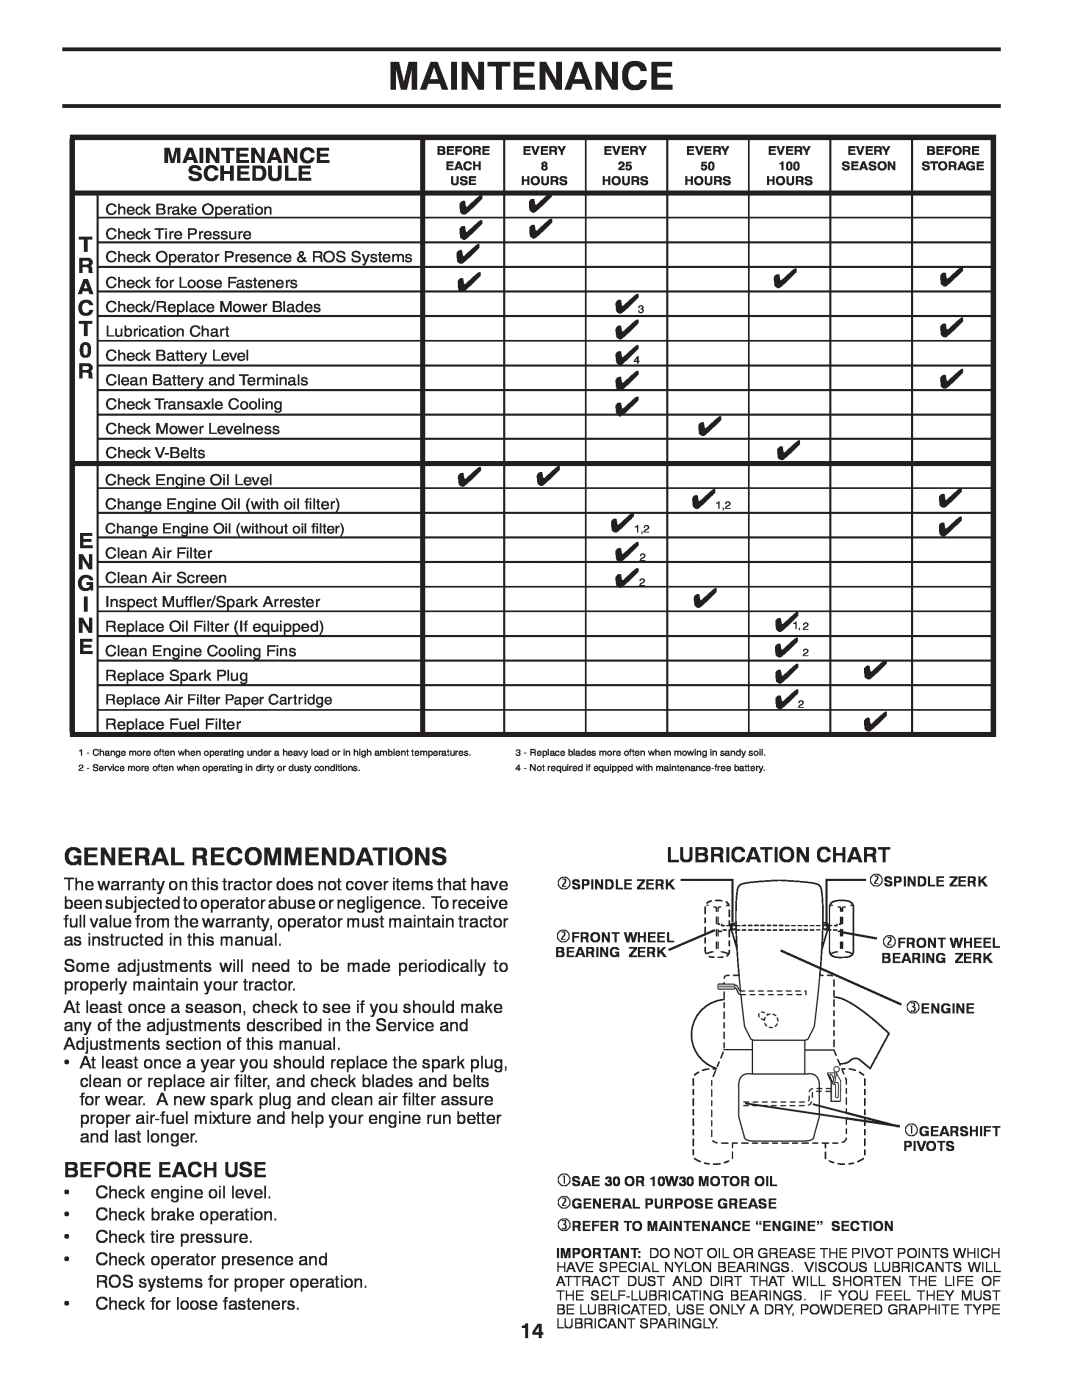 Poulan 438719, 96012011000 manual Maintenance, General Recommendations, Schedule, Before Each Use, Lubrication Chart 